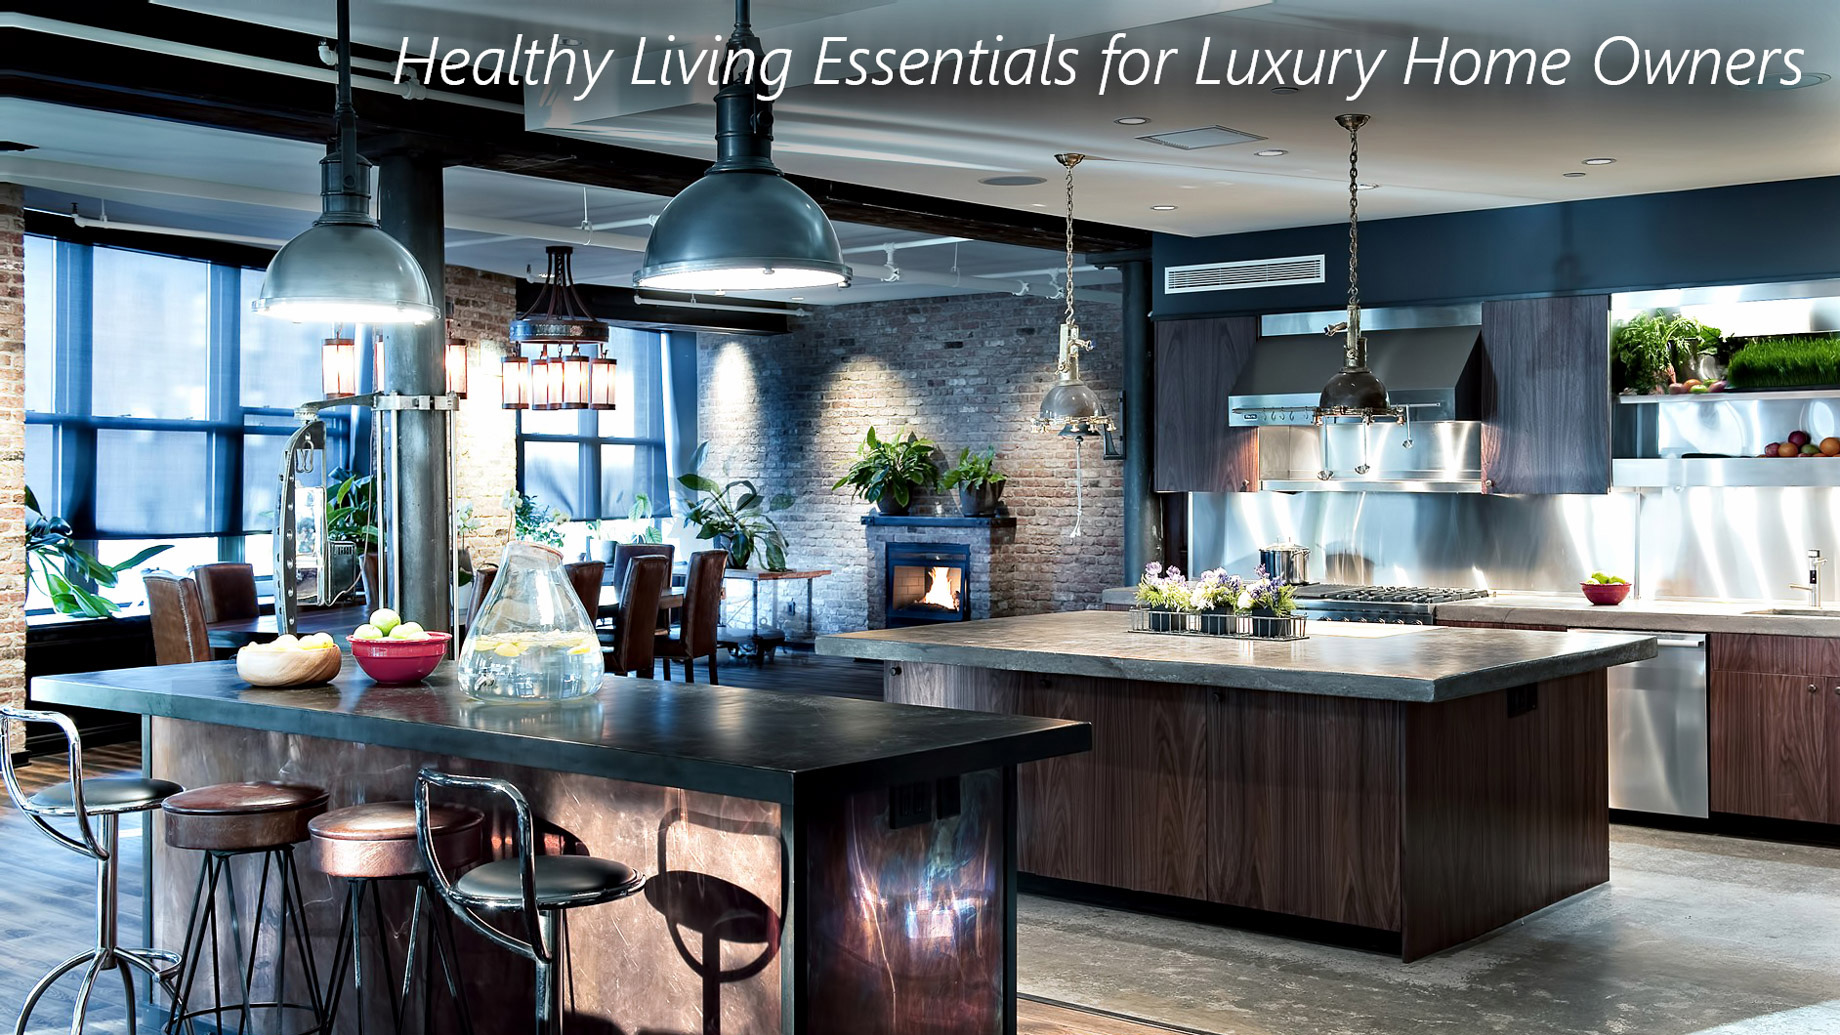 Healthy Living Essentials for Luxury Home Owners